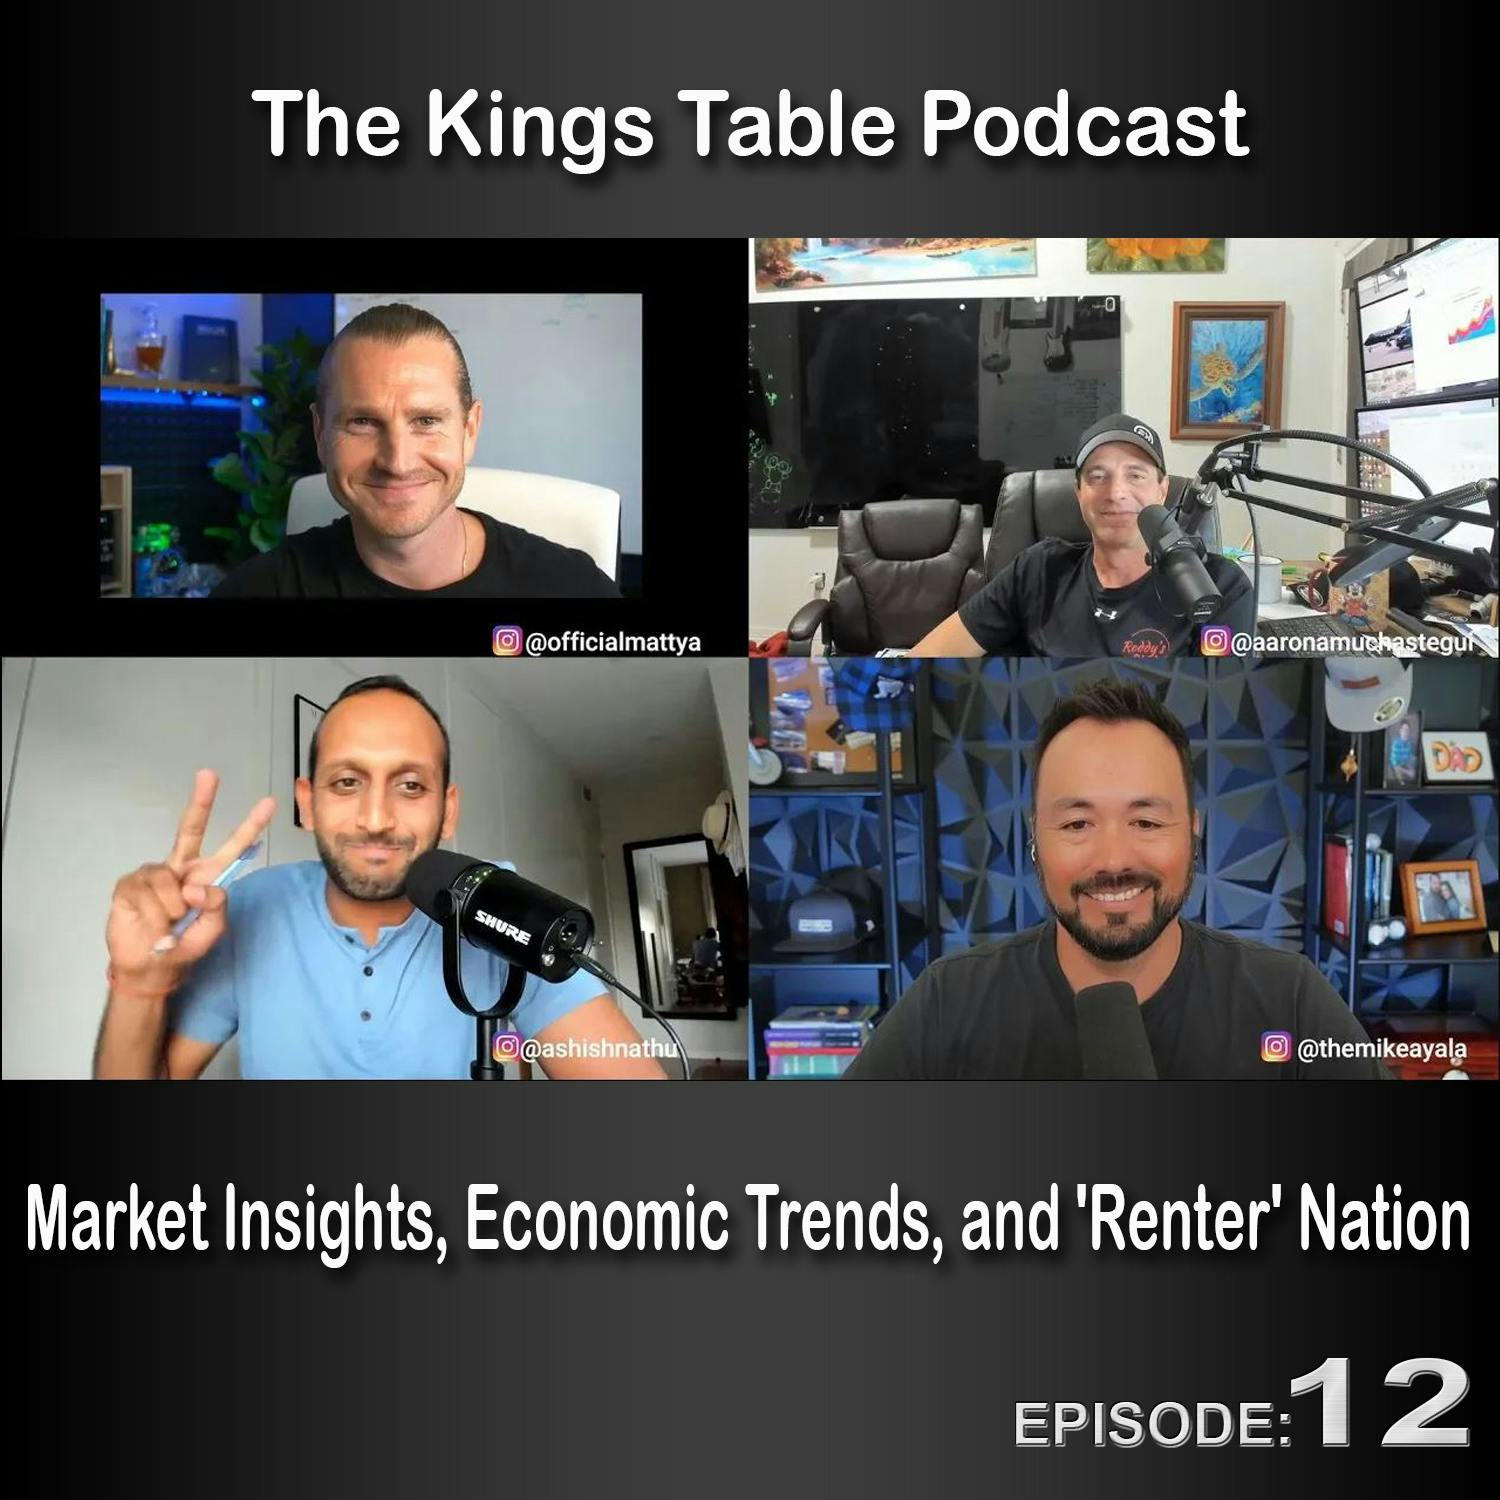 The Kings Table Episode 12 - Market Insights, Economic Trends, and 'Renter' Nation